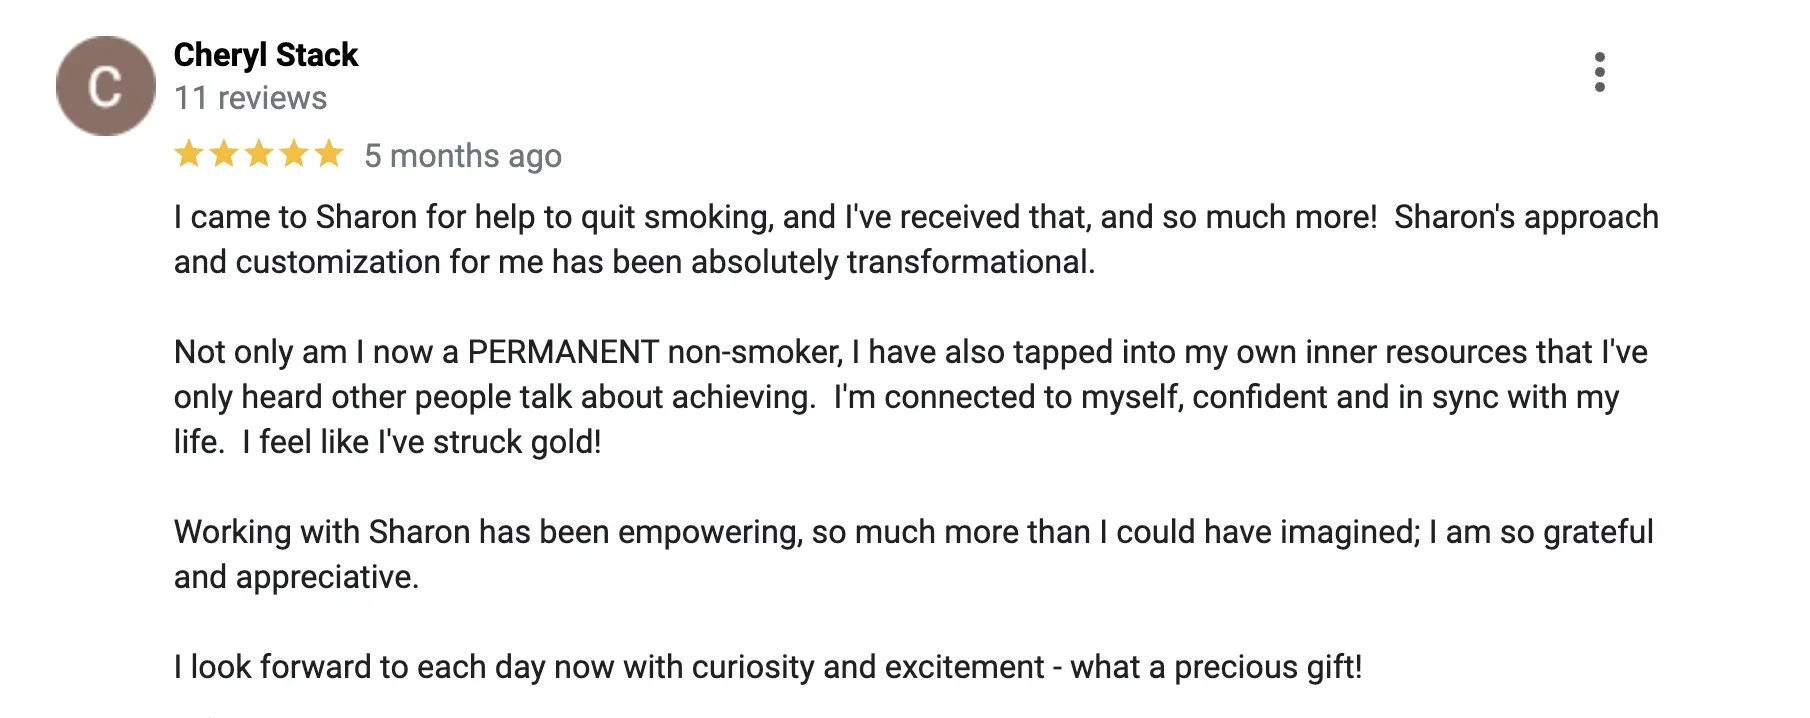 Customer review praising Sharon Jackman for transformational hypnotherapy